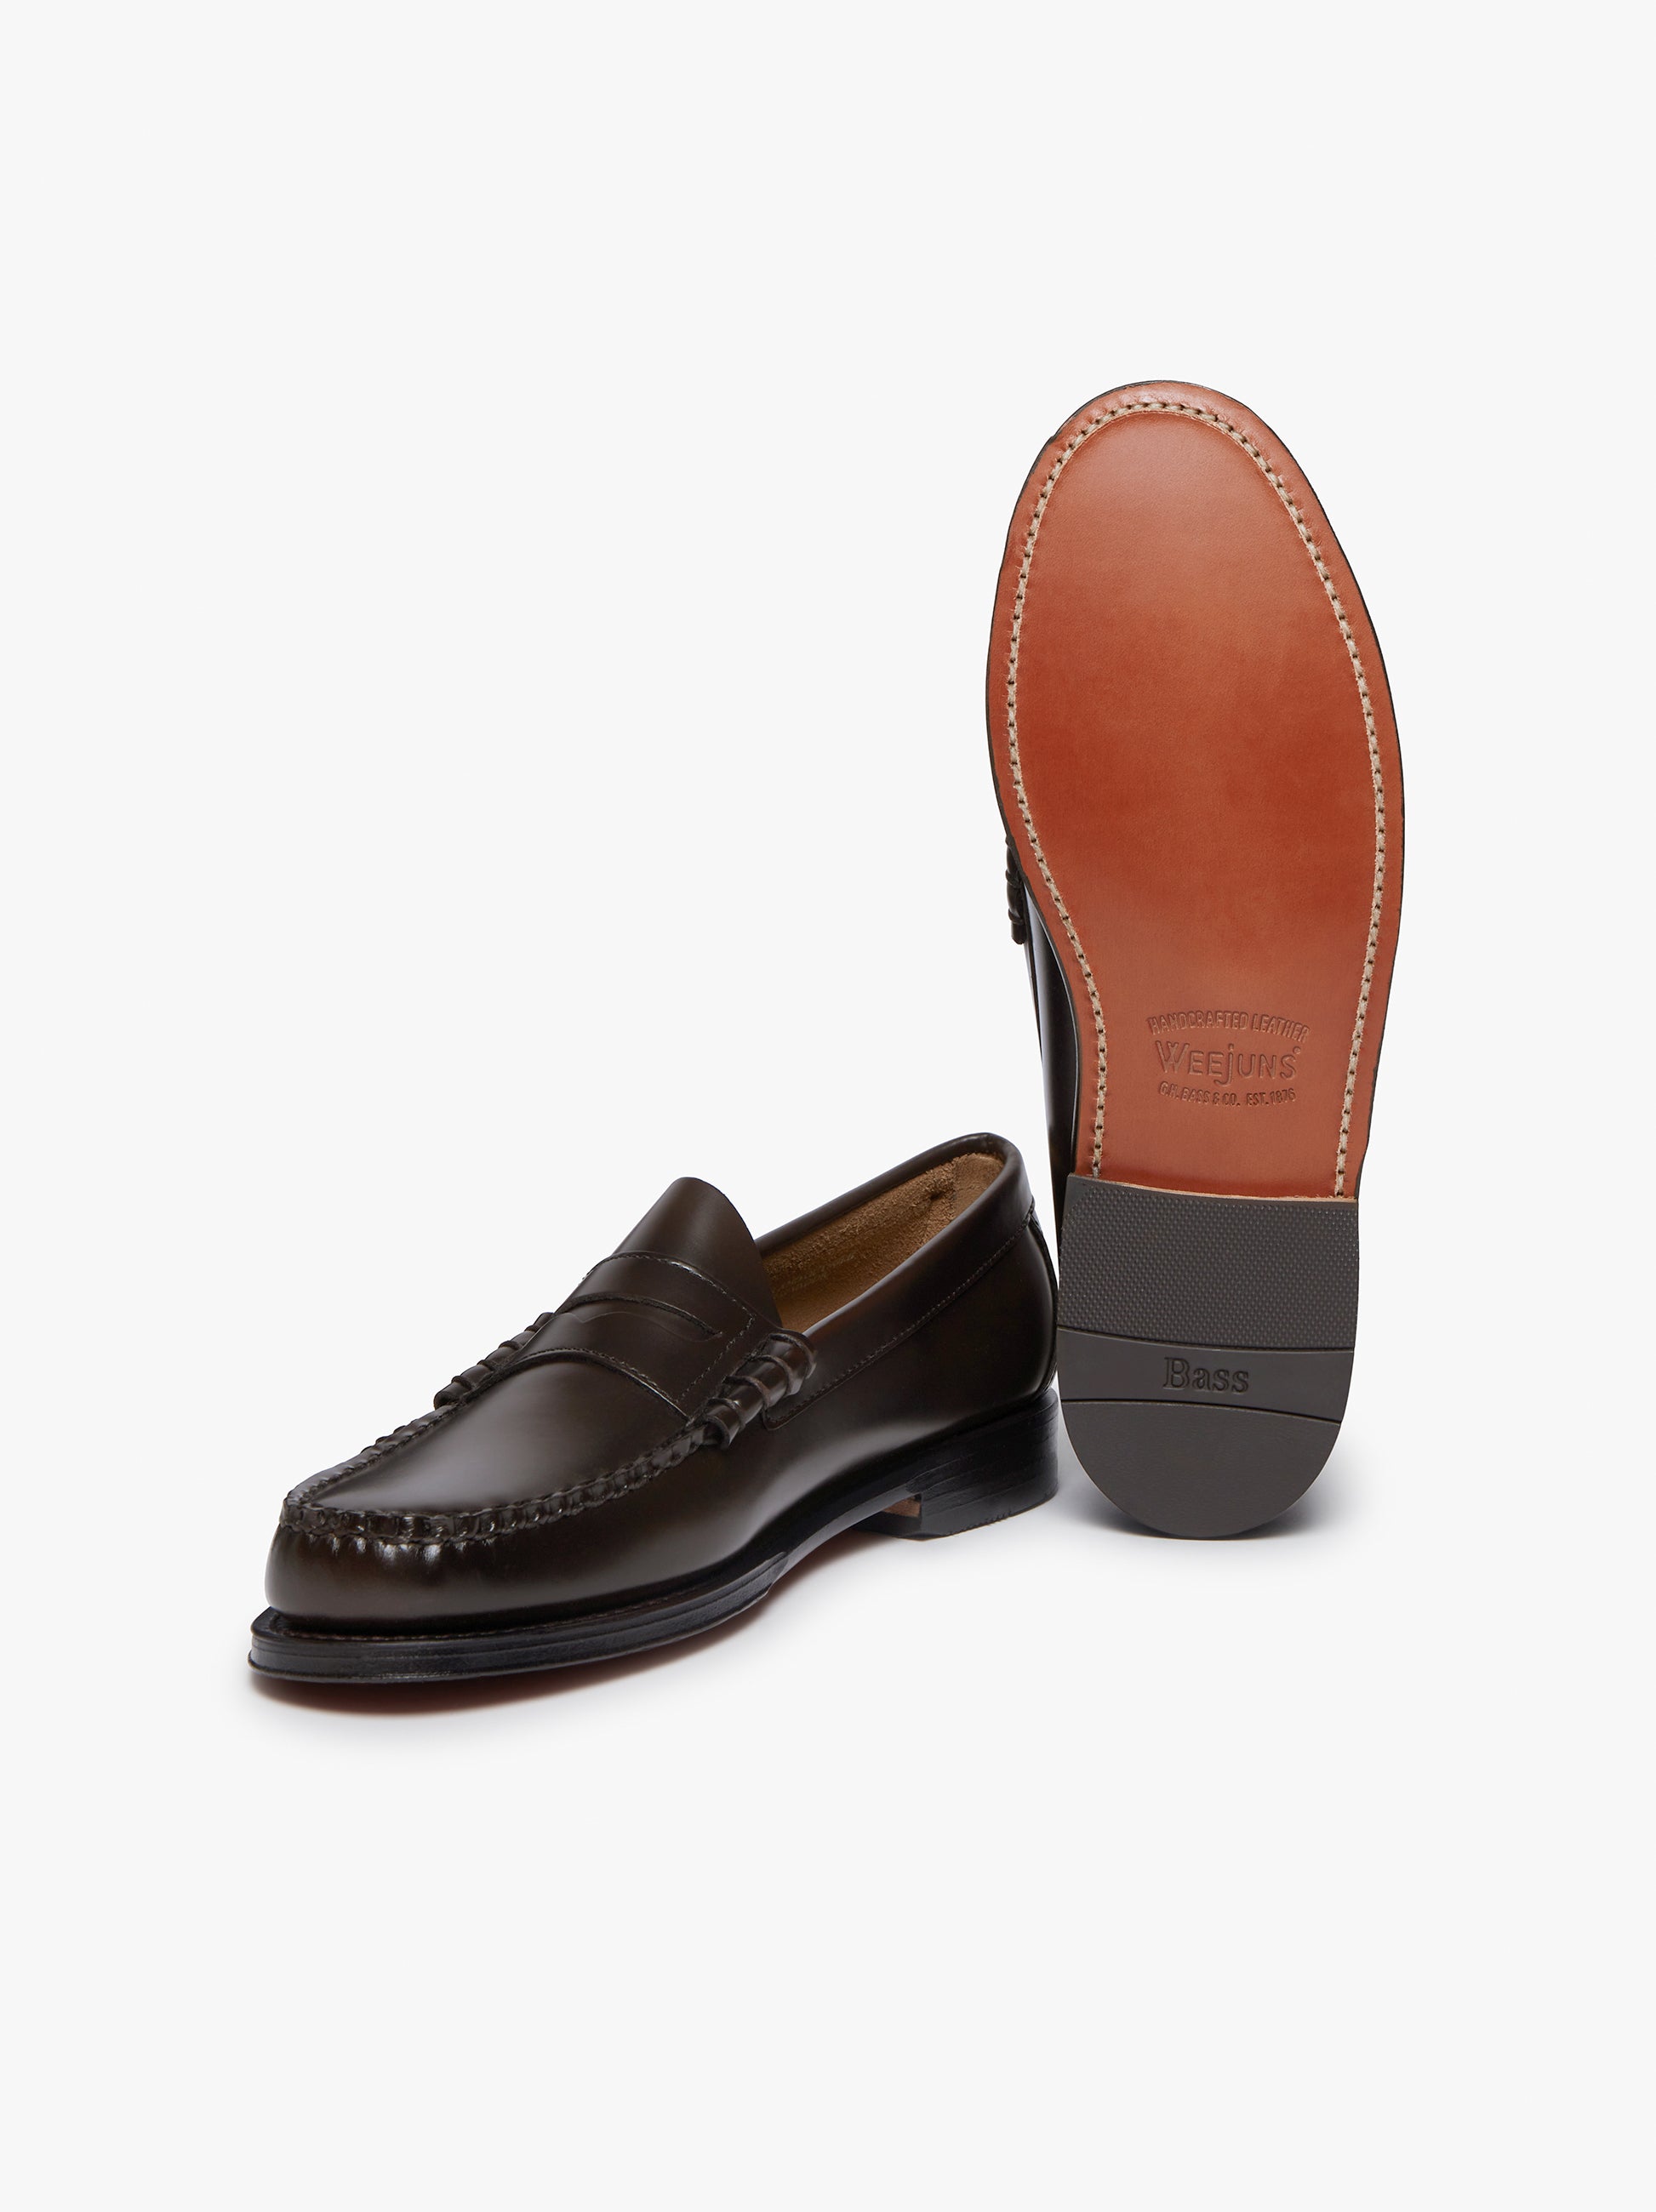 Chocolate Loafers | Chocolate Brown Loafers Mens – G.H.BASS – G.H.